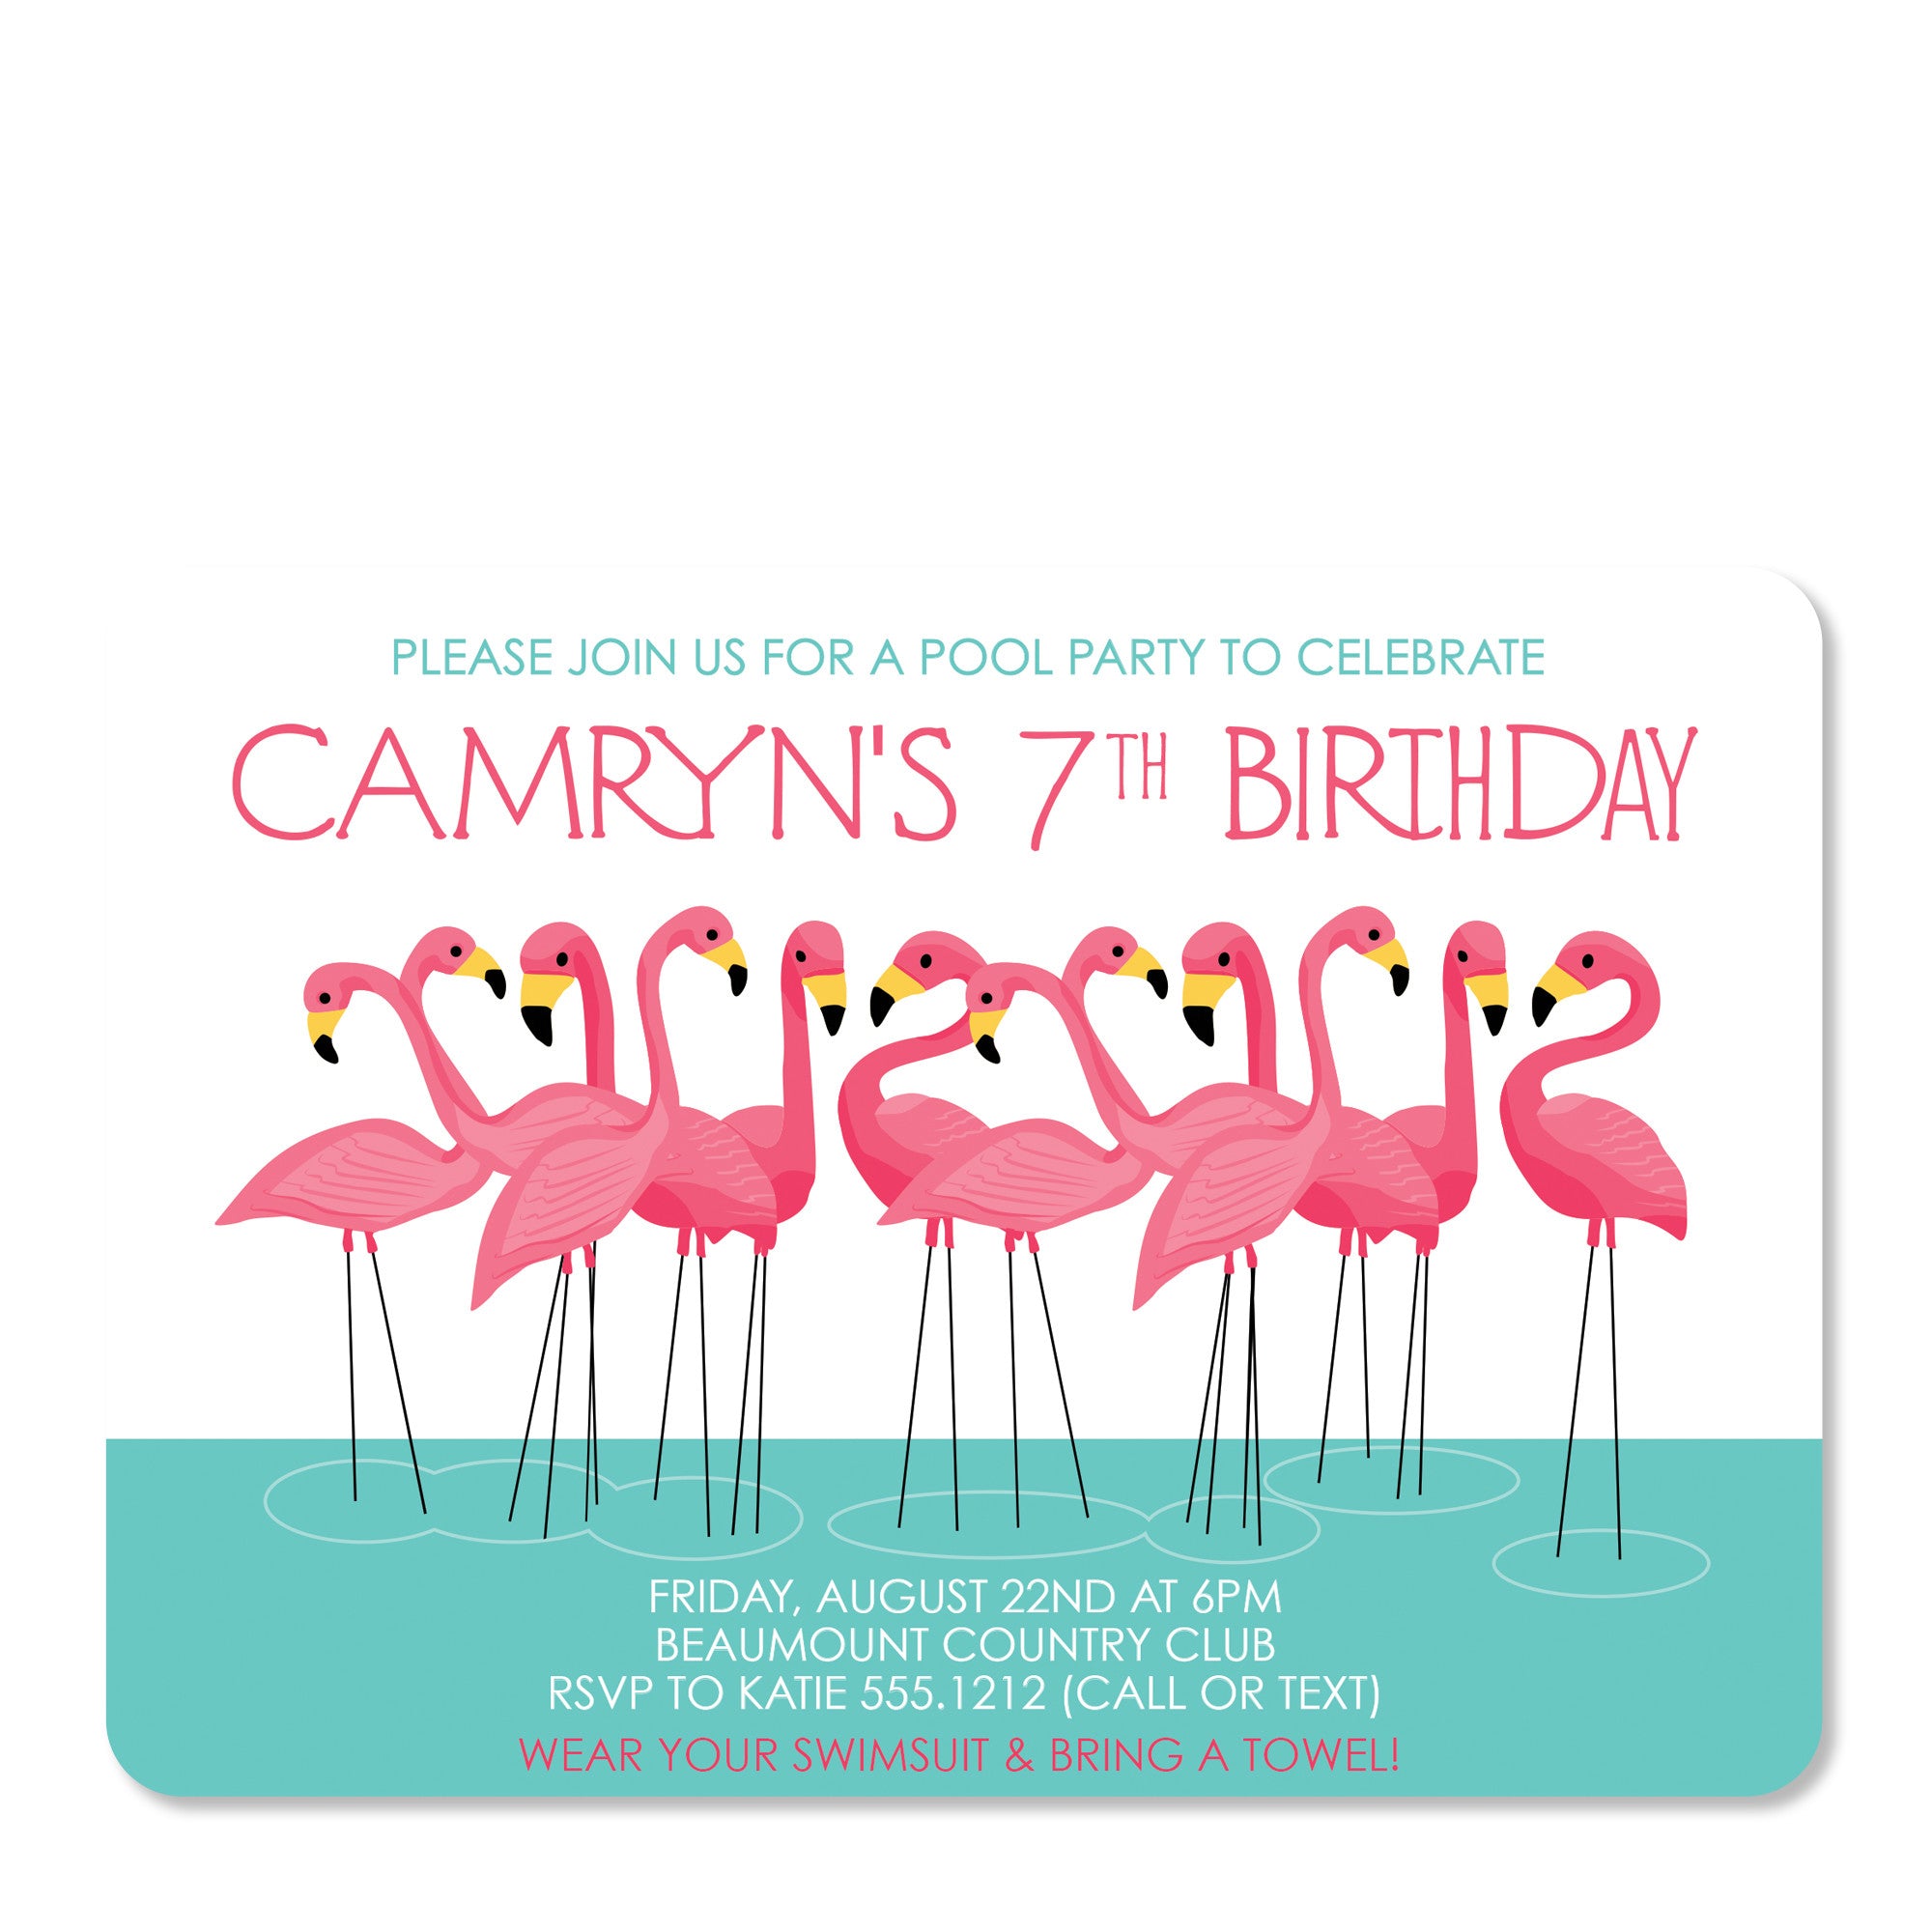 Flamingo Party Birthday Invitation, perfect for a pool party or splash party, printed on heavyweight premium cardstock, from Pipsy.com